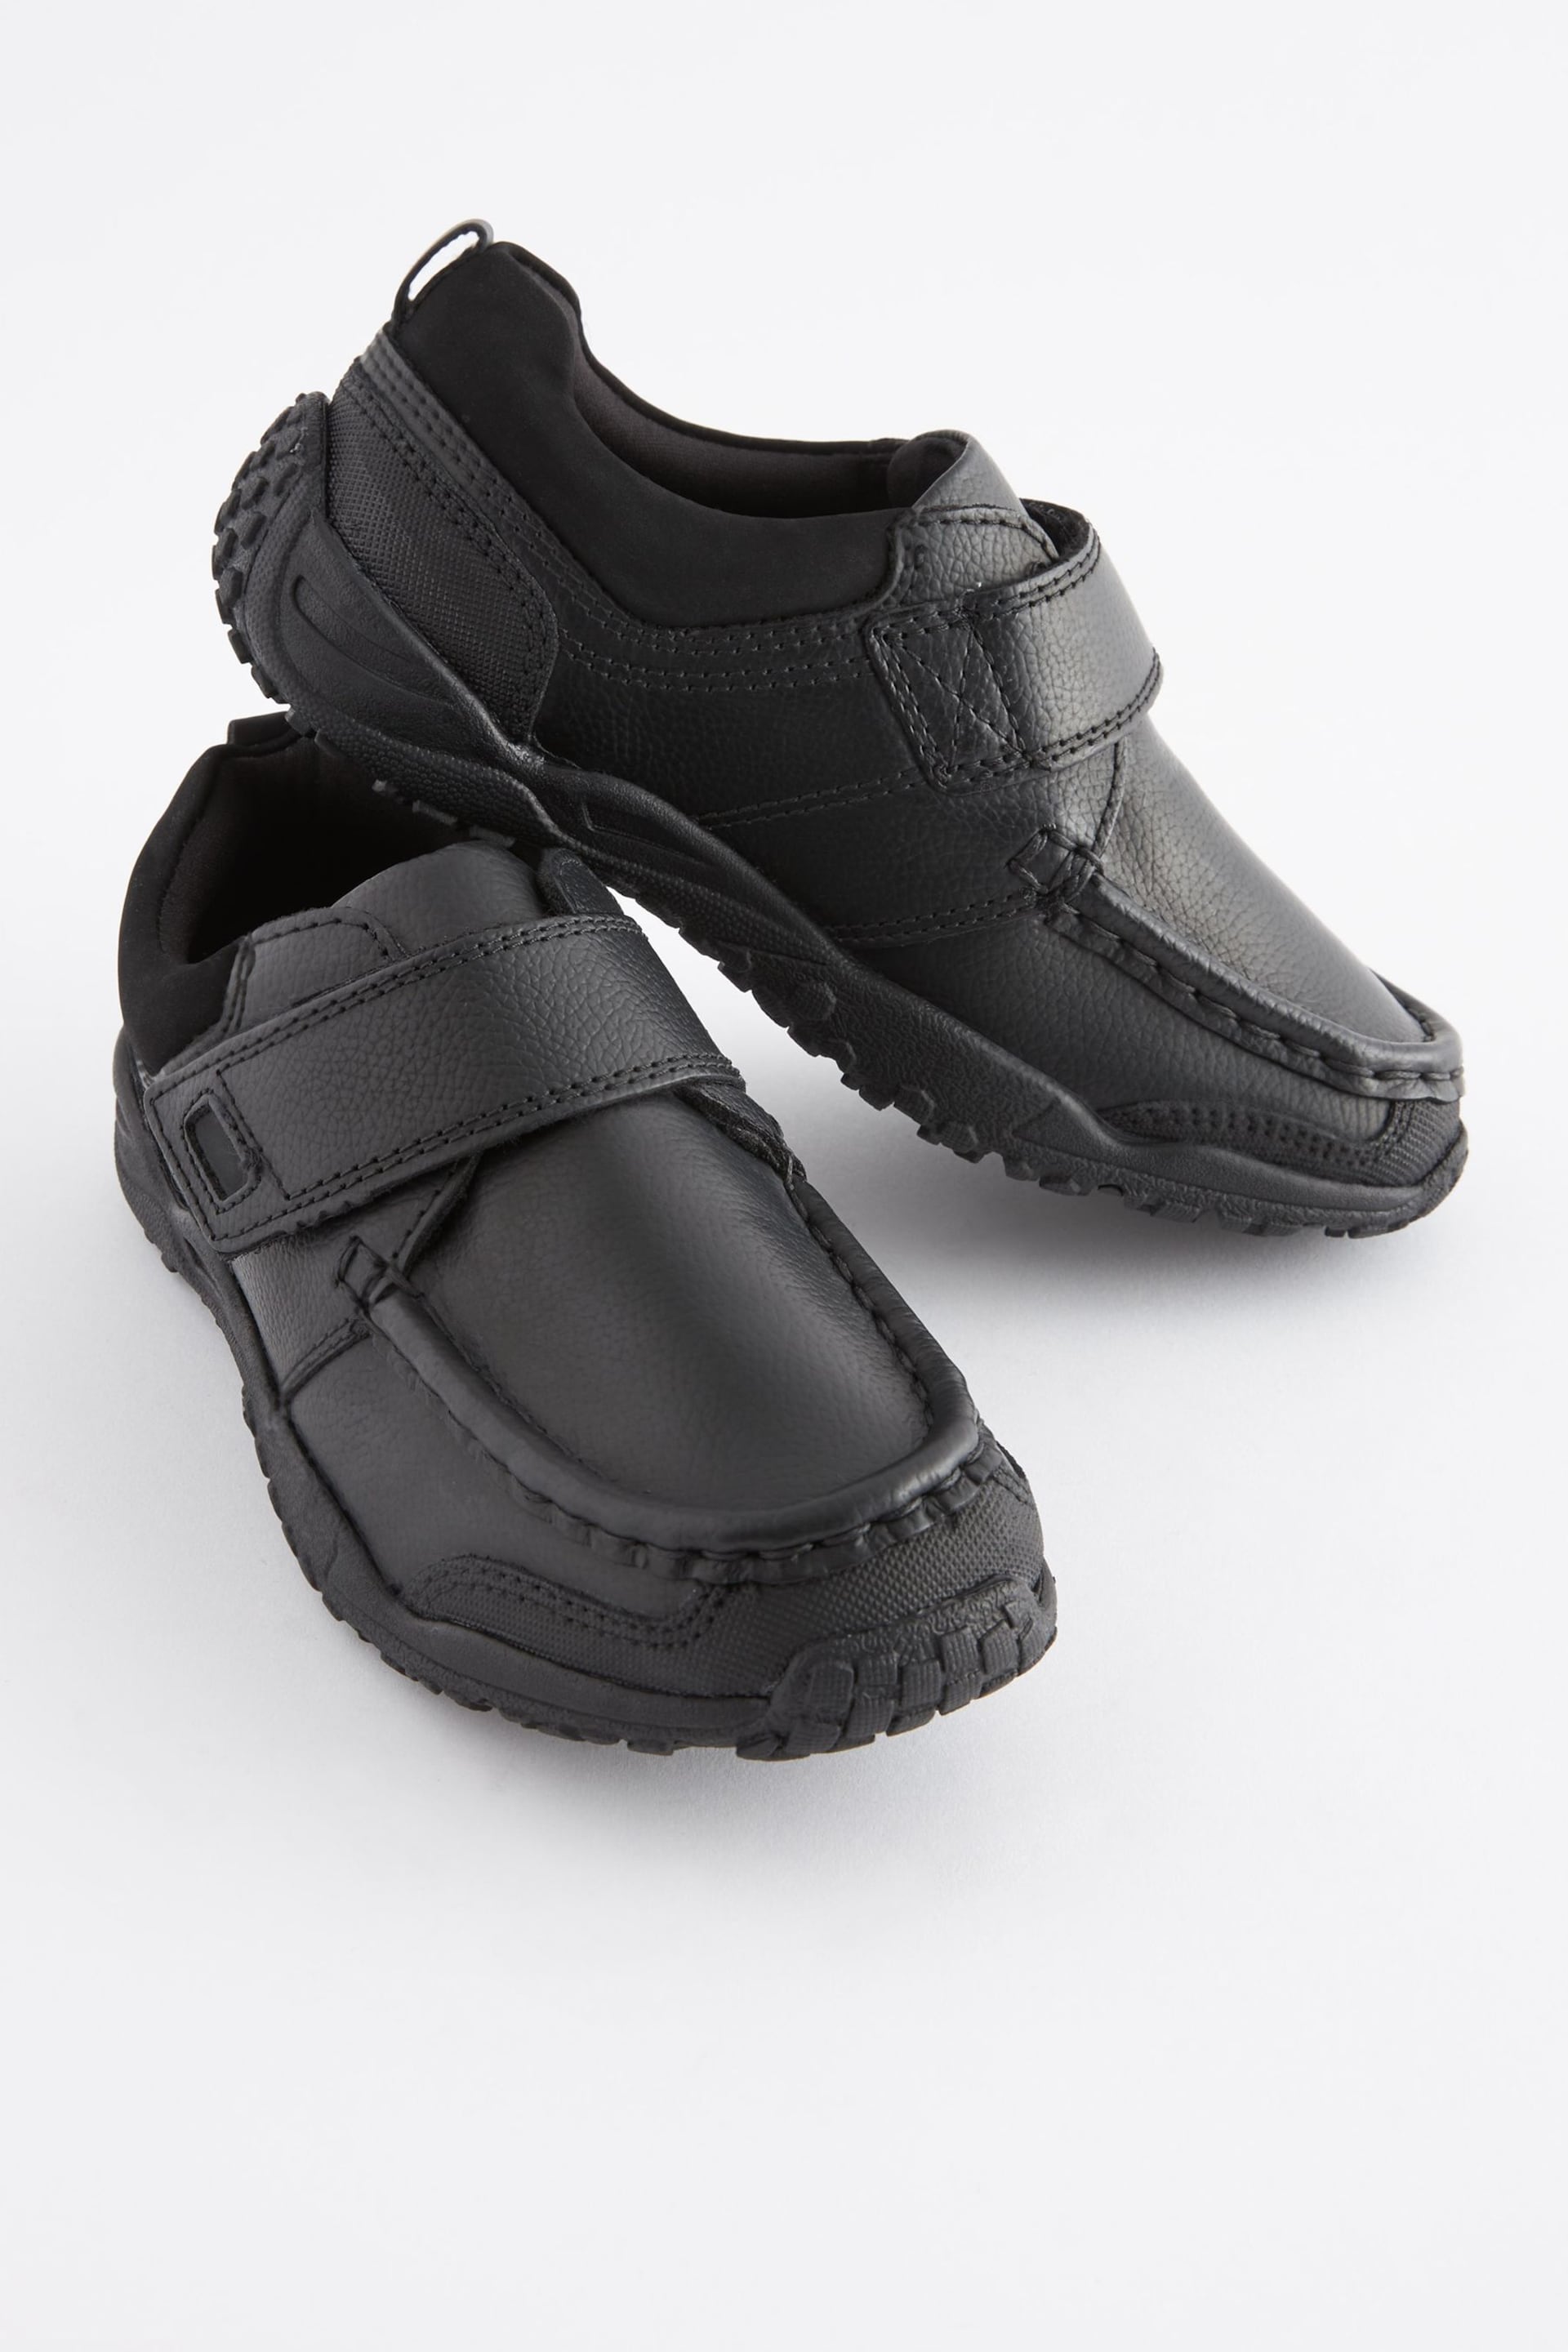 Black Standard Fit (F) School Leather Single Strap Shoes - Image 1 of 10